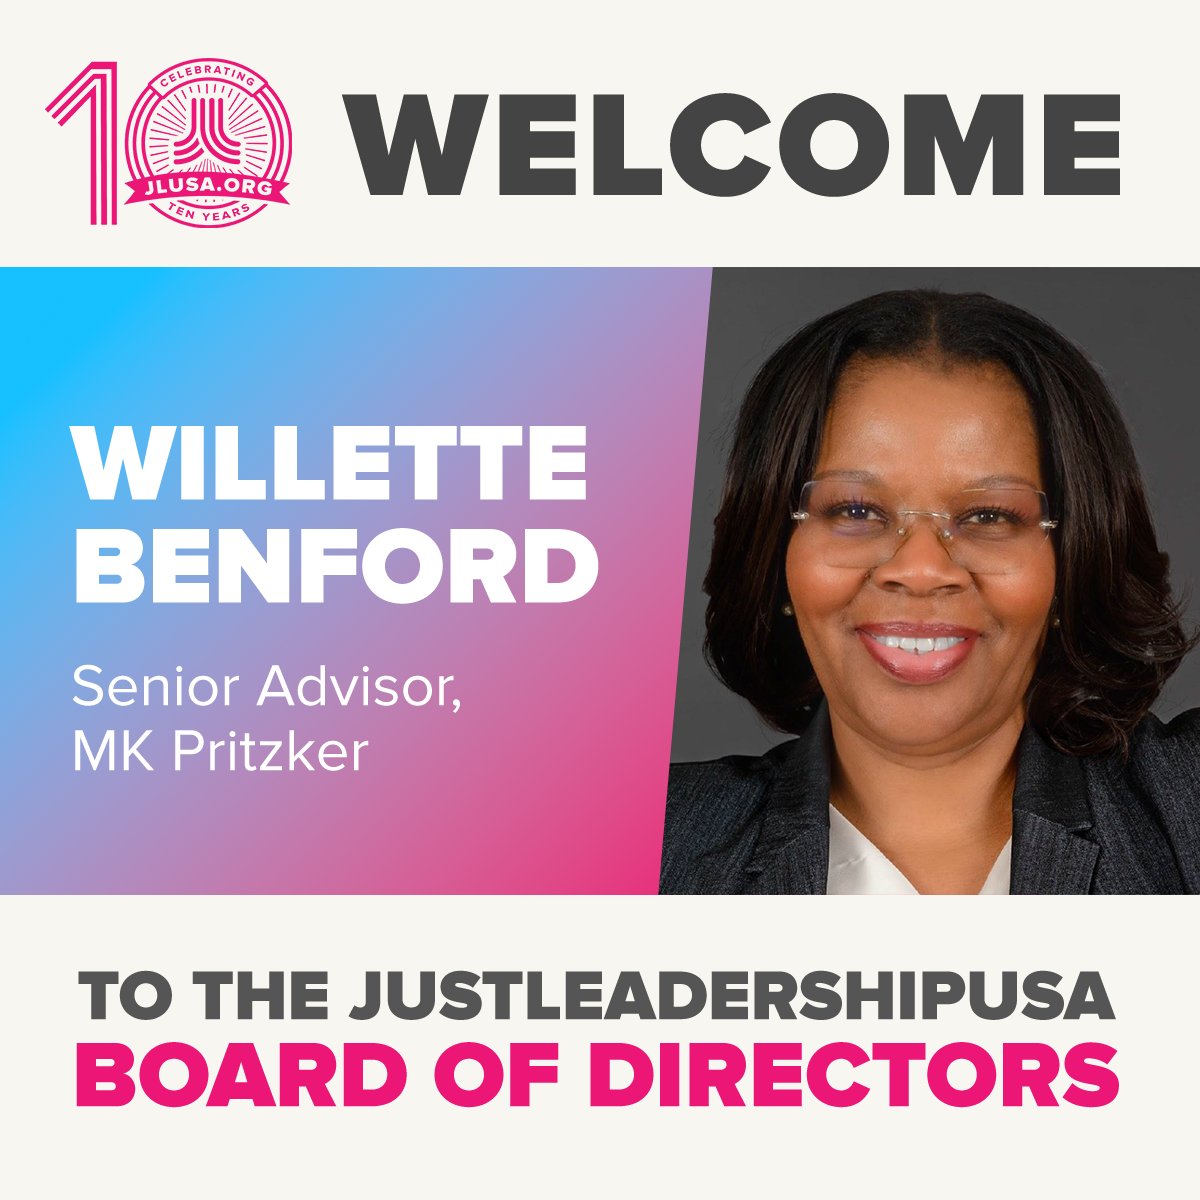 We’re so excited to welcome @BenfordWillette—Senior Advisor to MK Pritzker, First Lady of Illinois—to the JustLeadershipUSA Board of Directors! Get to know Willette: jlusa.org/willettebenford #JLUSAstrong